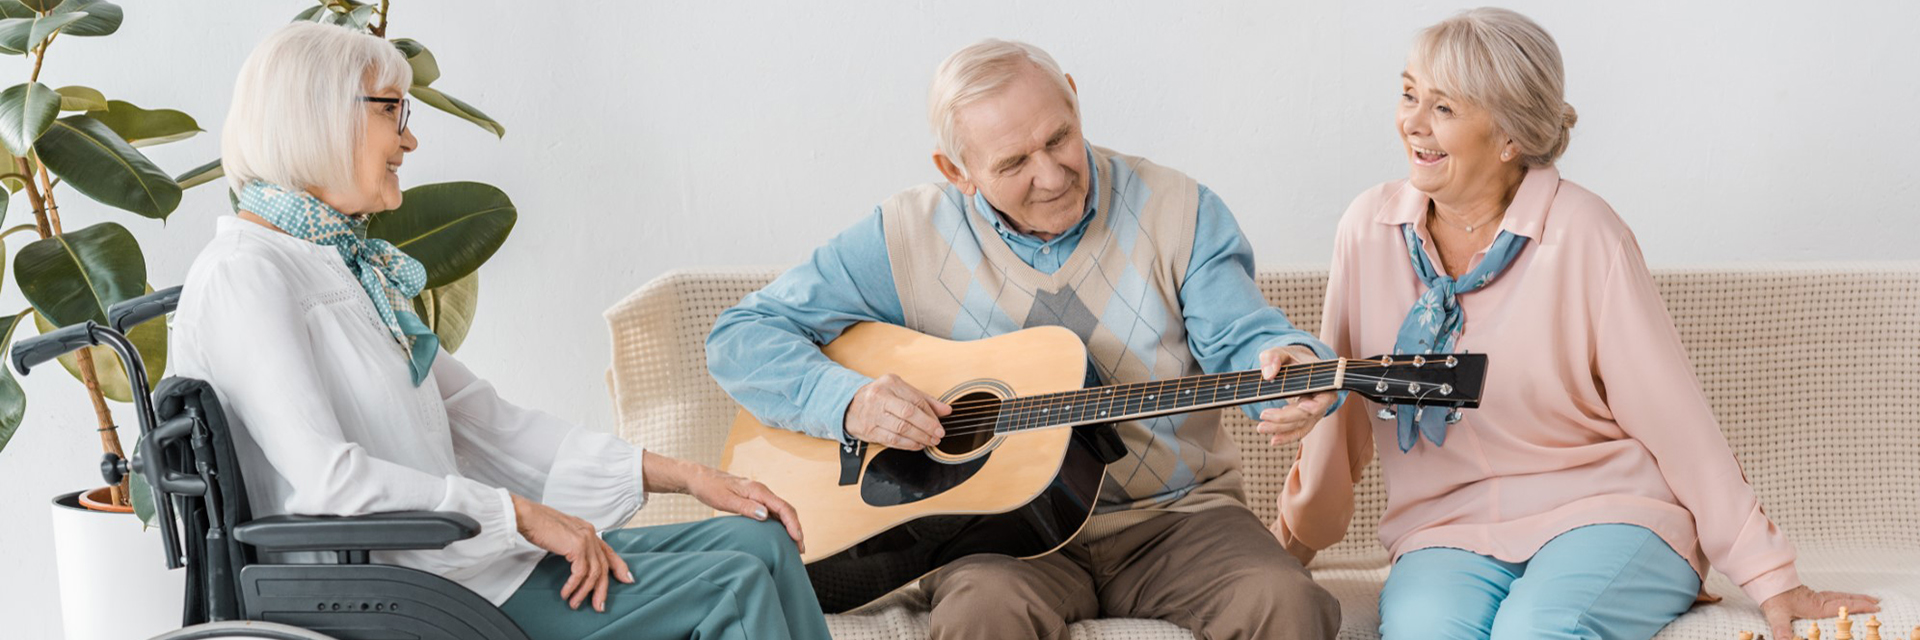 three people sitting with man in middle playing guitar